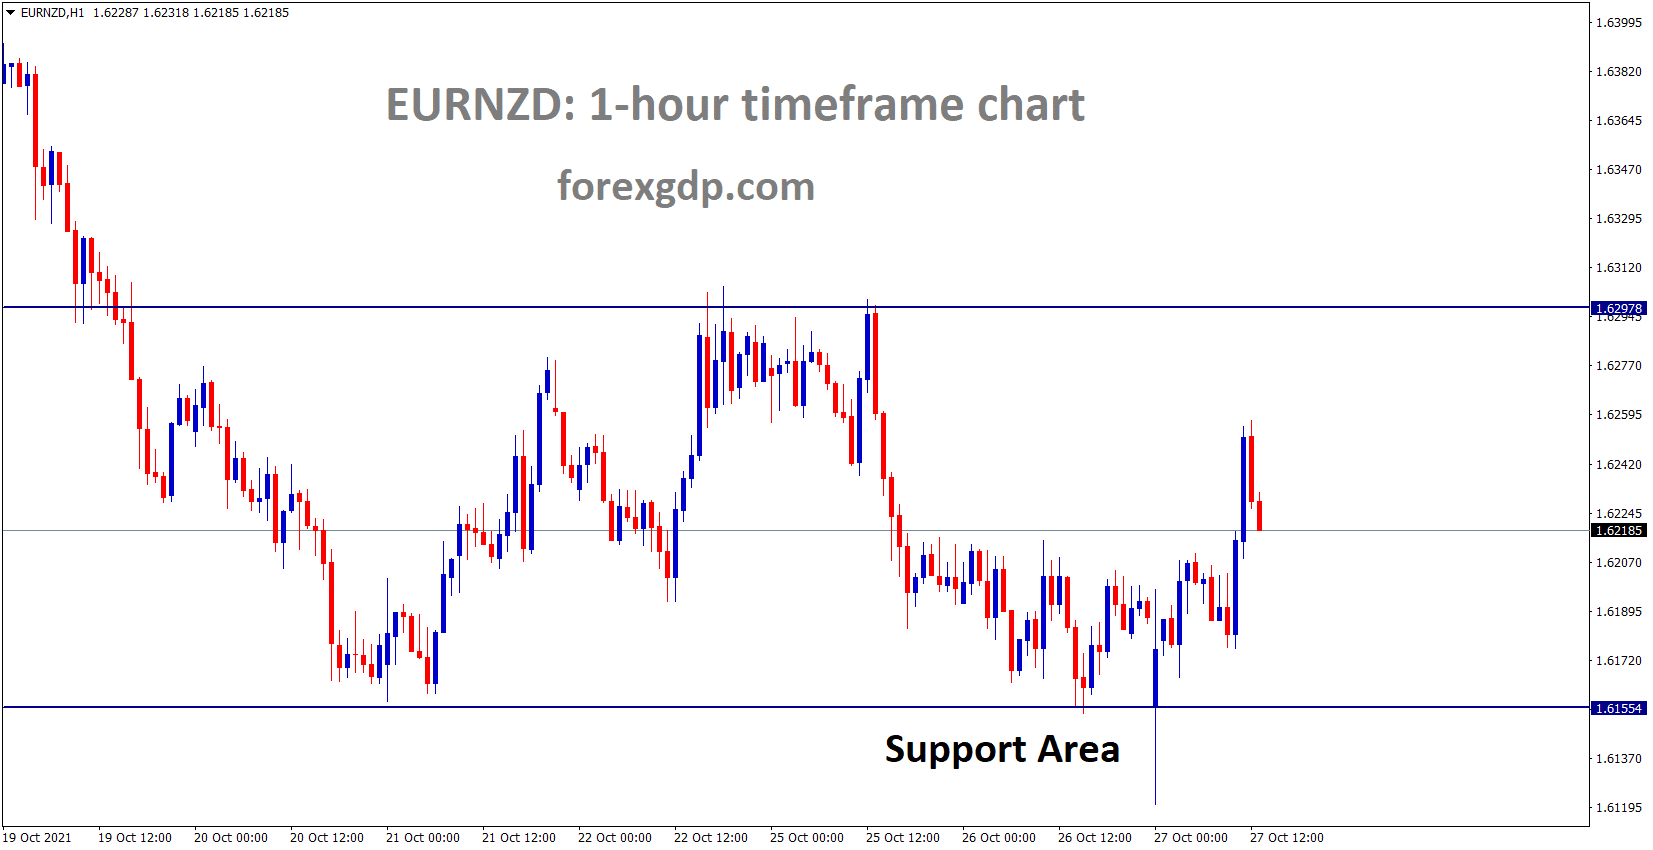 EURNZD is moving in a Box Pattern and the market rebounded from the Support Area.